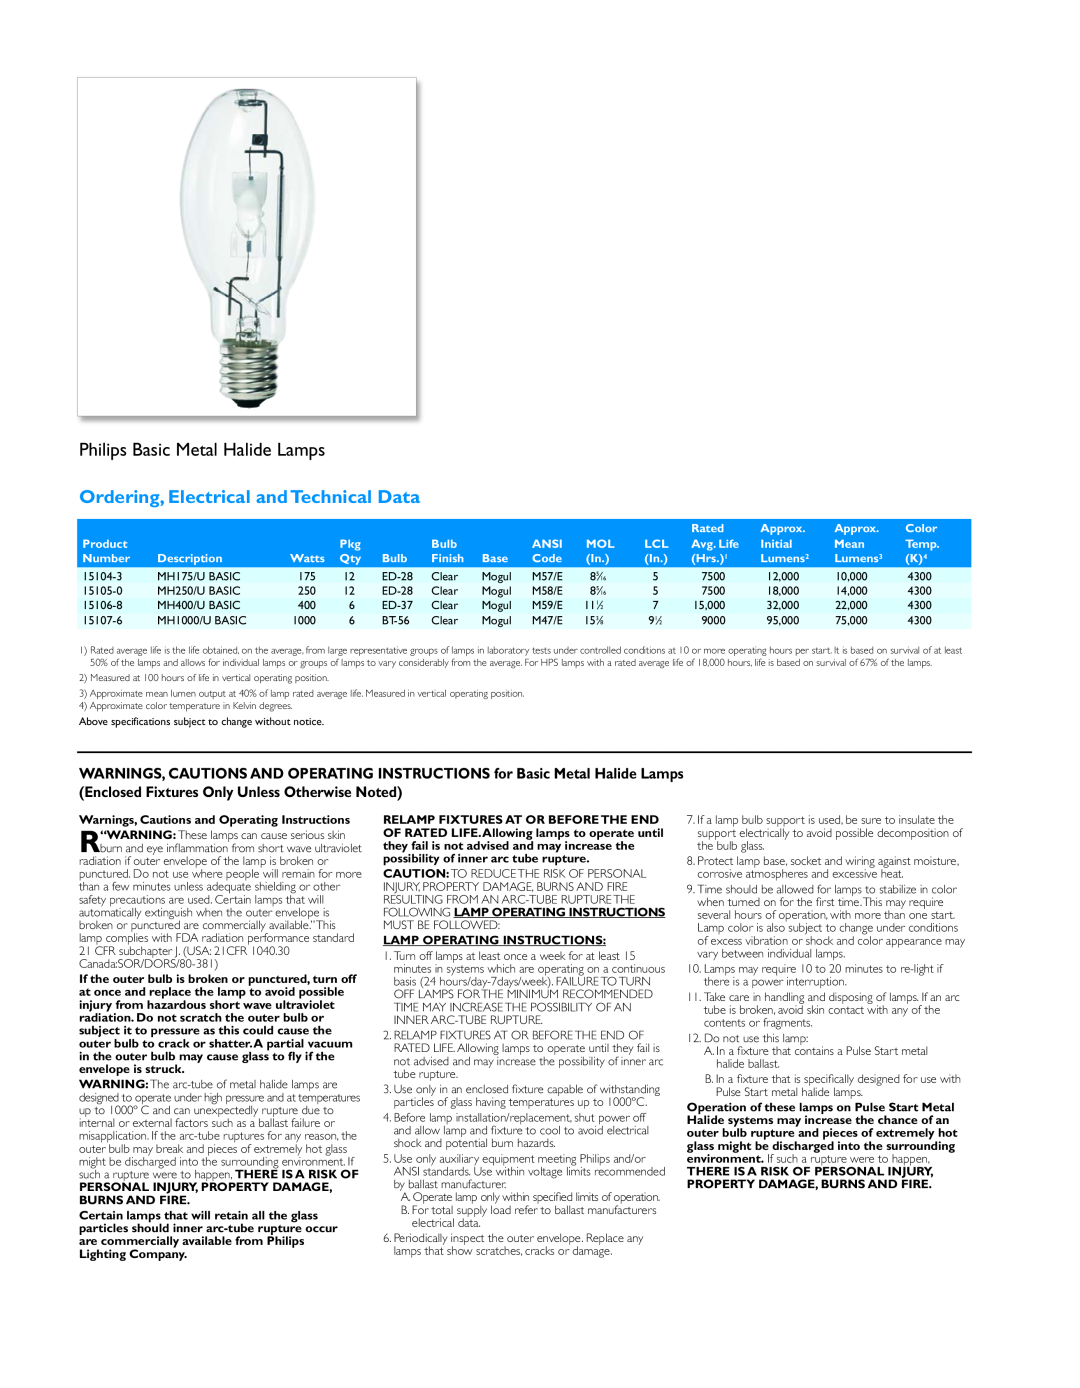 Philips Basic HID Lamp manual Philips Basic Metal Halide Lamps, Ordering, Electrical and Technical Data 